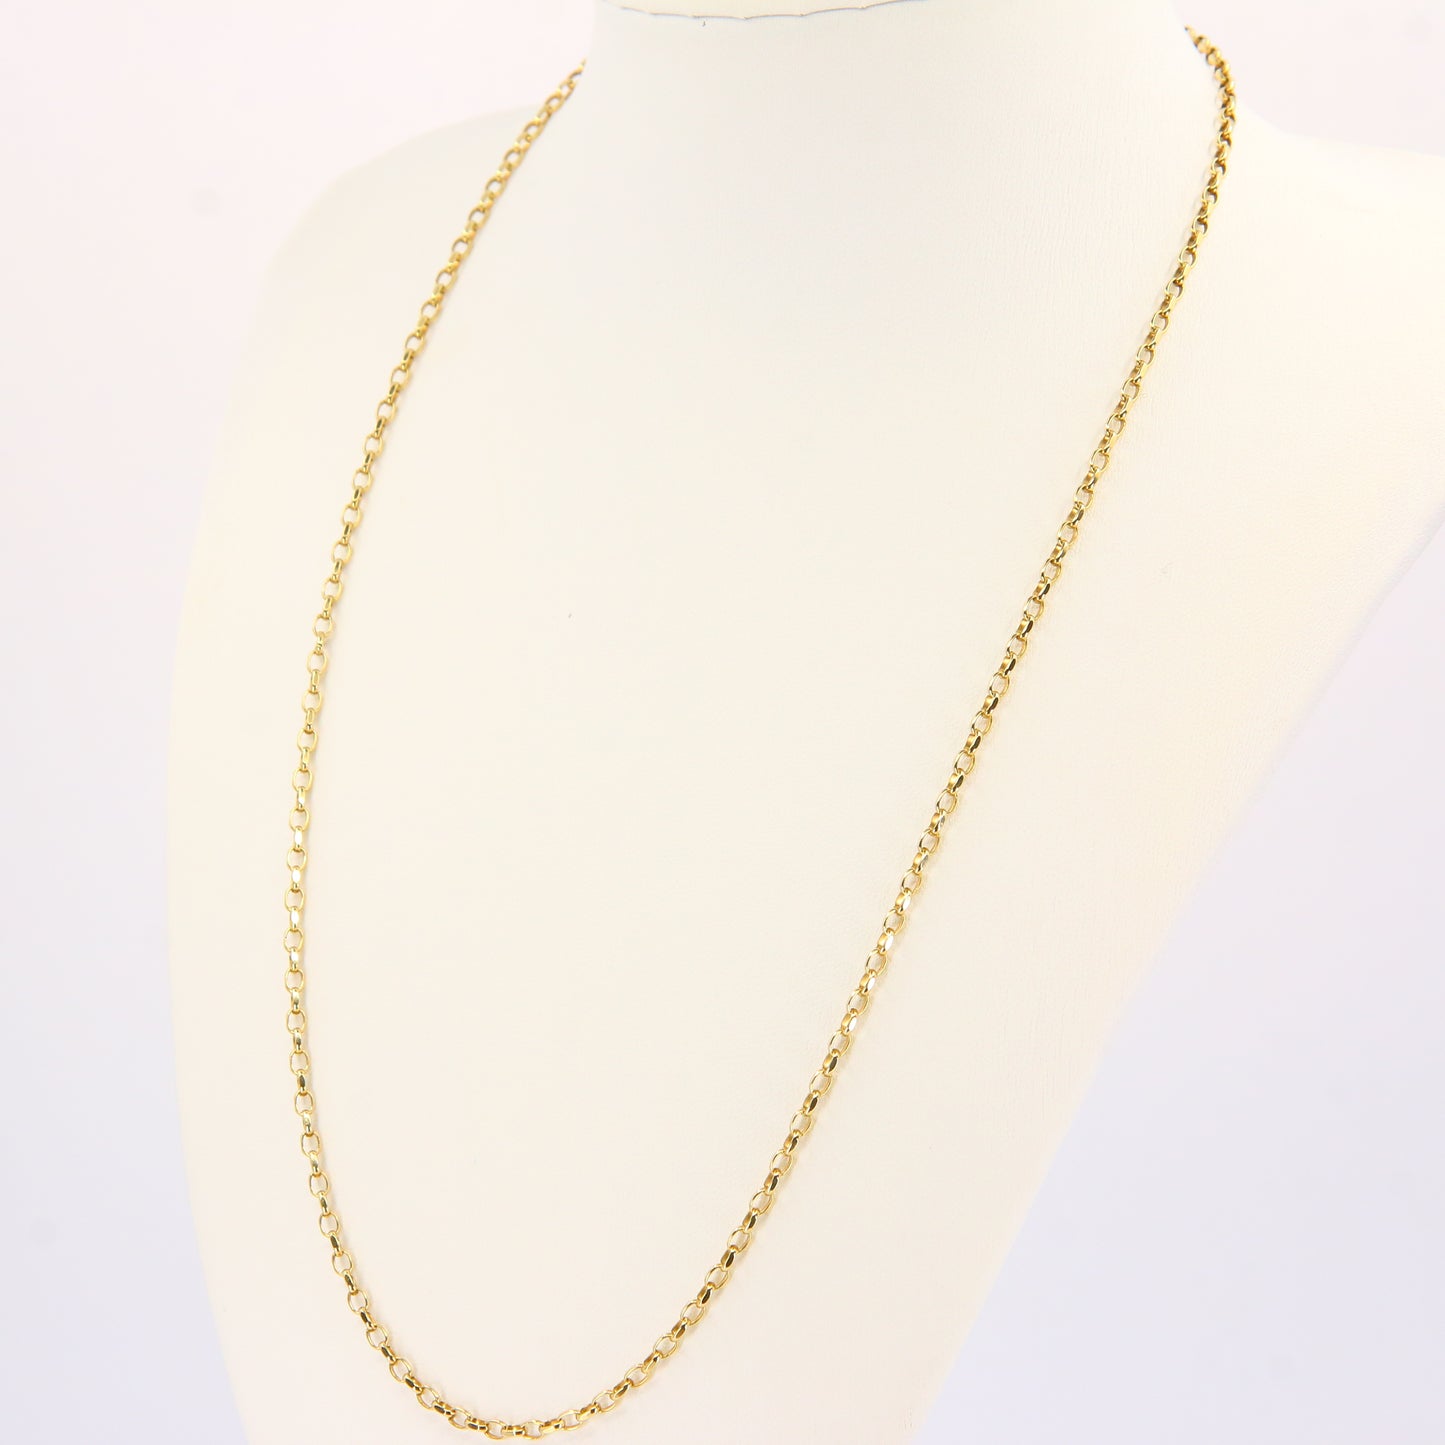 Vintage 9ct Gold Round Link Chain Necklace Fine Jewellery Yellow Gold Necklace